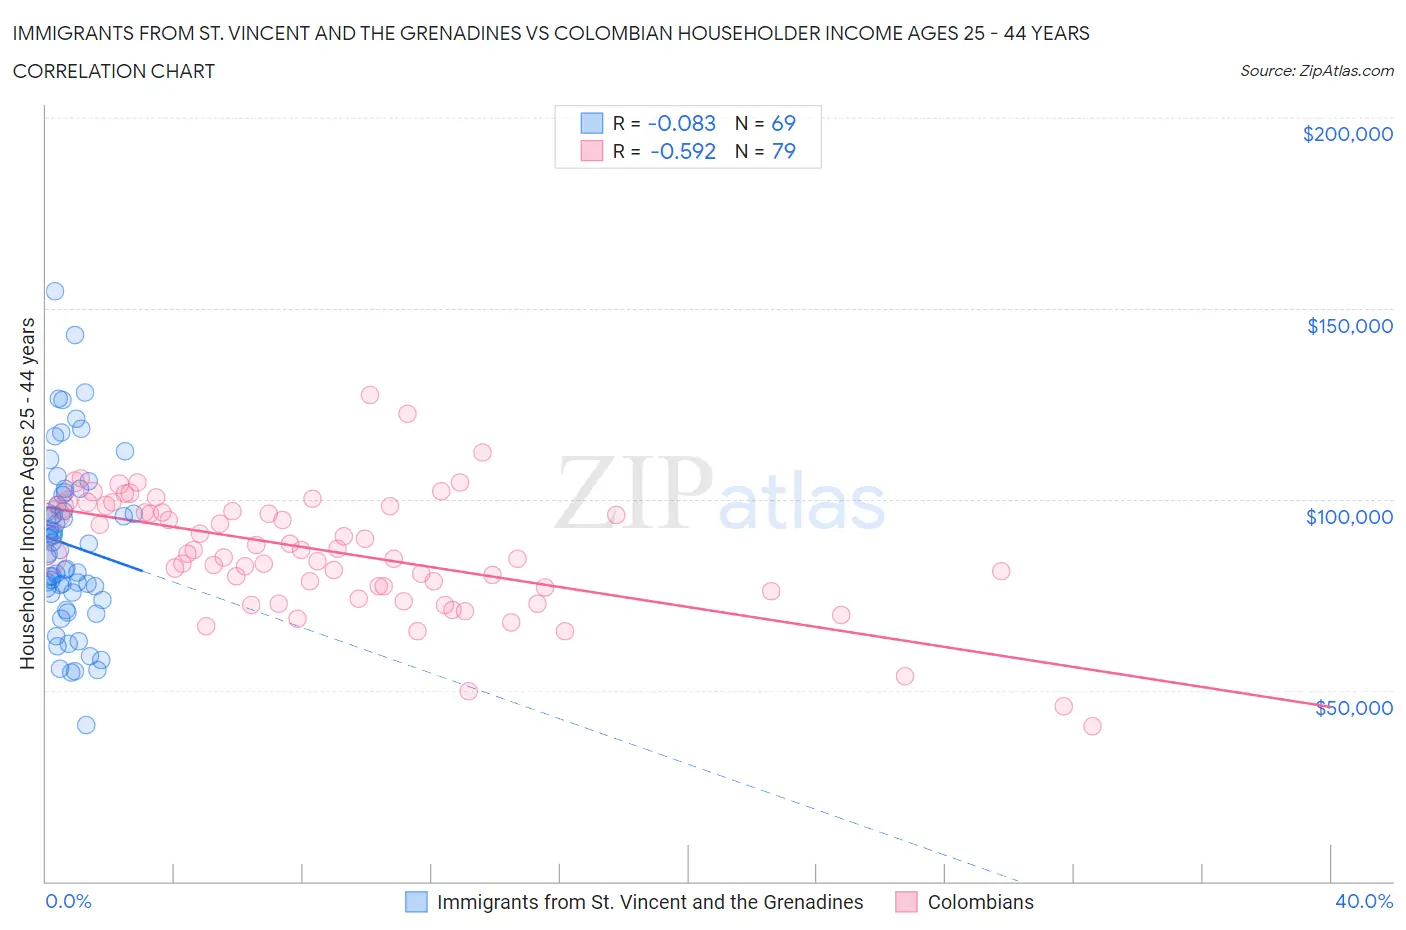 Immigrants from St. Vincent and the Grenadines vs Colombian Householder Income Ages 25 - 44 years